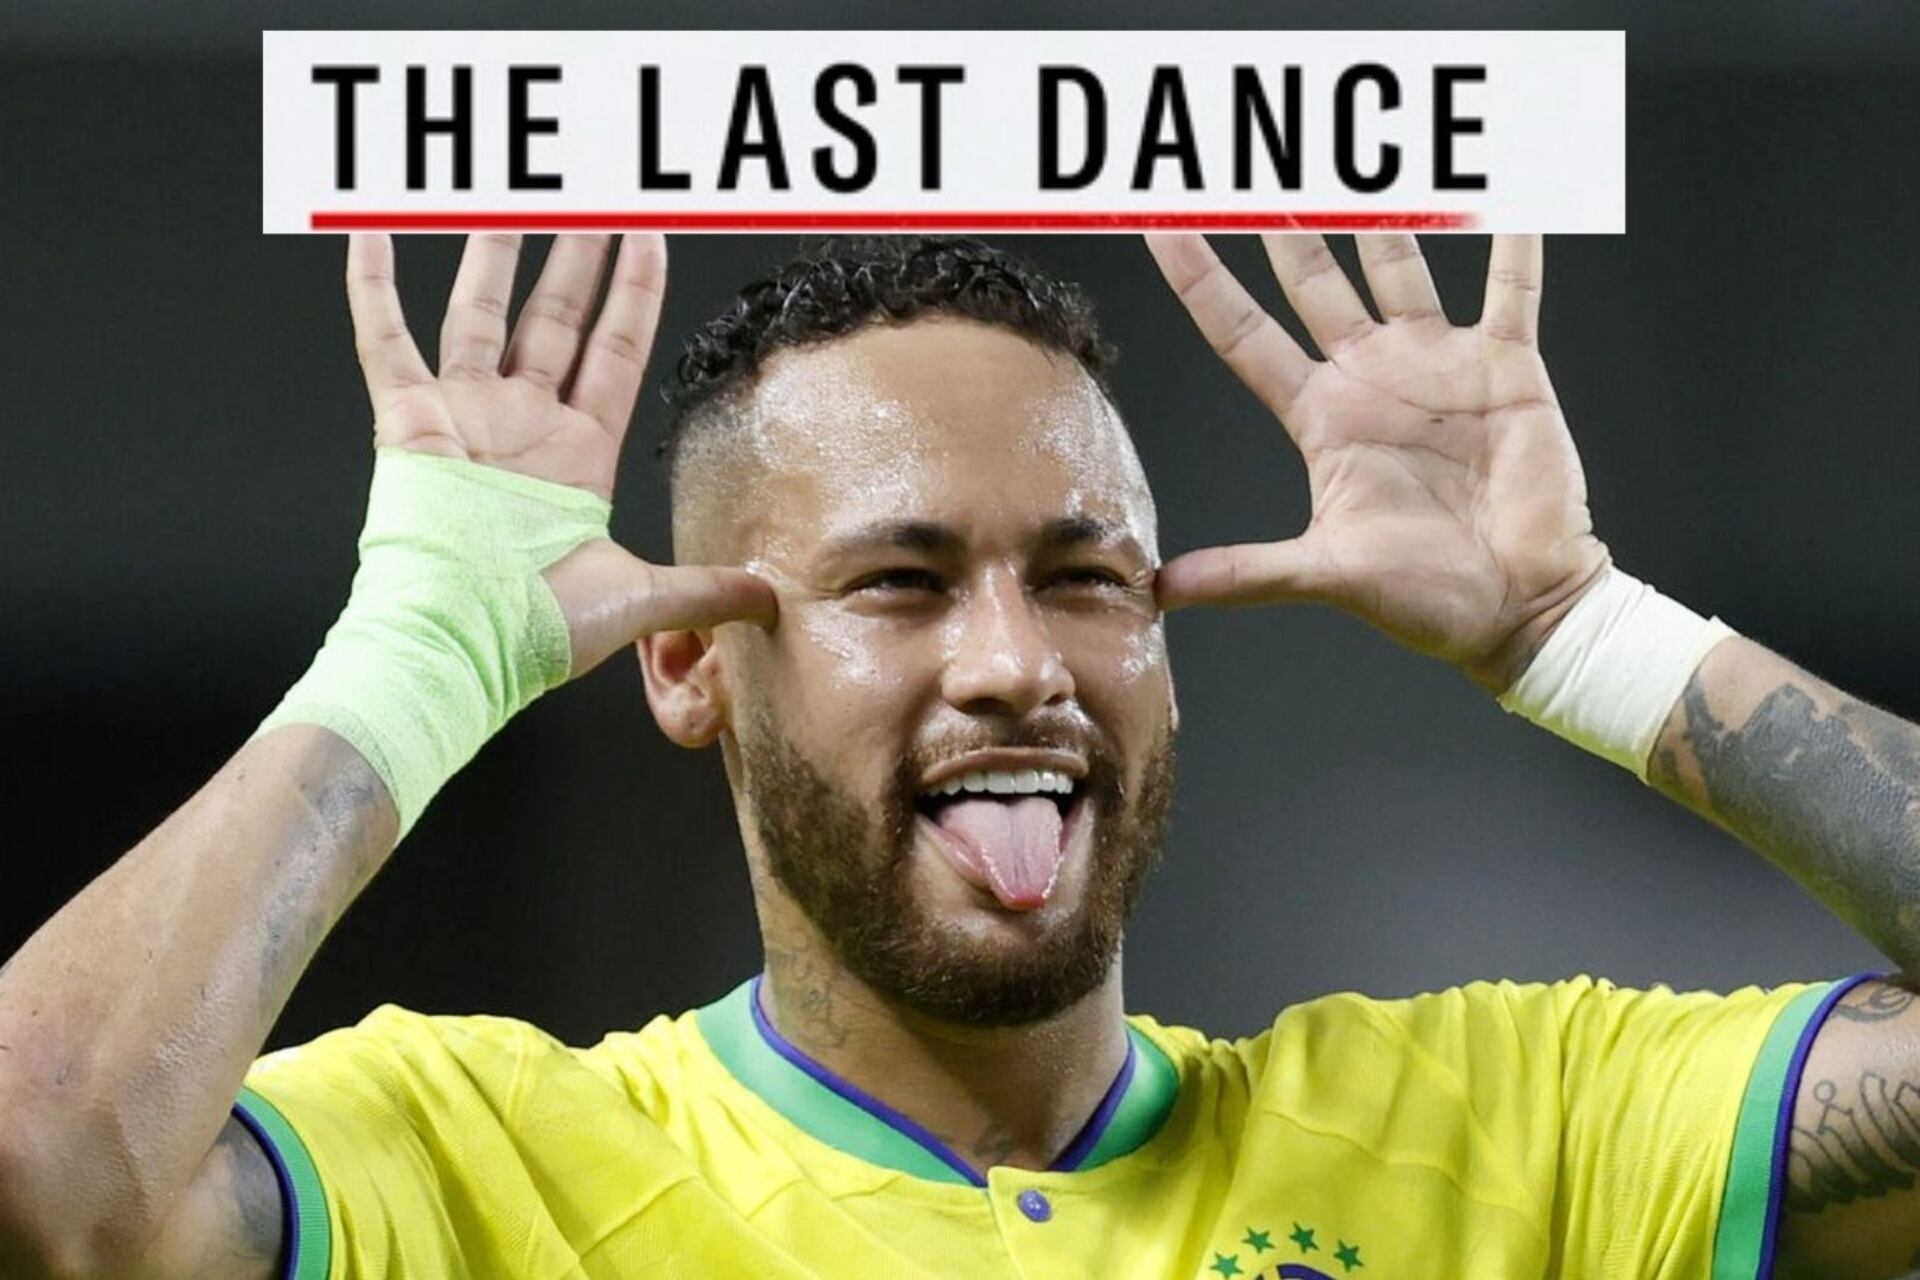 Defined, the day of his birthday is known when will be Neymar's Last Dance